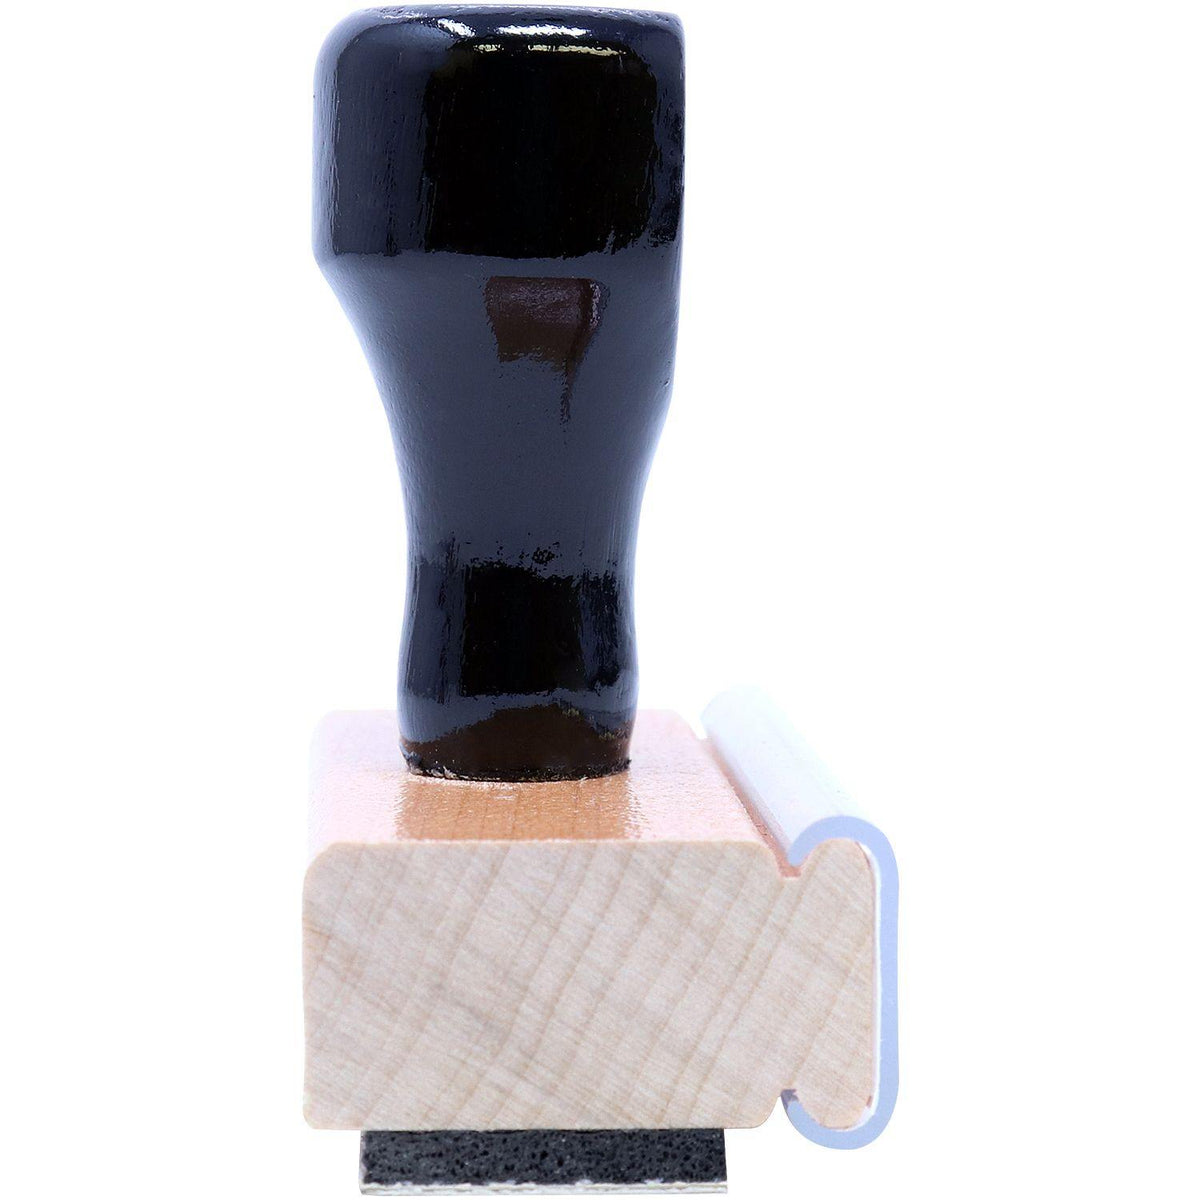 Large Service Copy Rubber Stamp - Engineer Seal Stamps - Brand_Acorn, Impression Size_Large, Stamp Type_Regular Stamp, Type of Use_Office